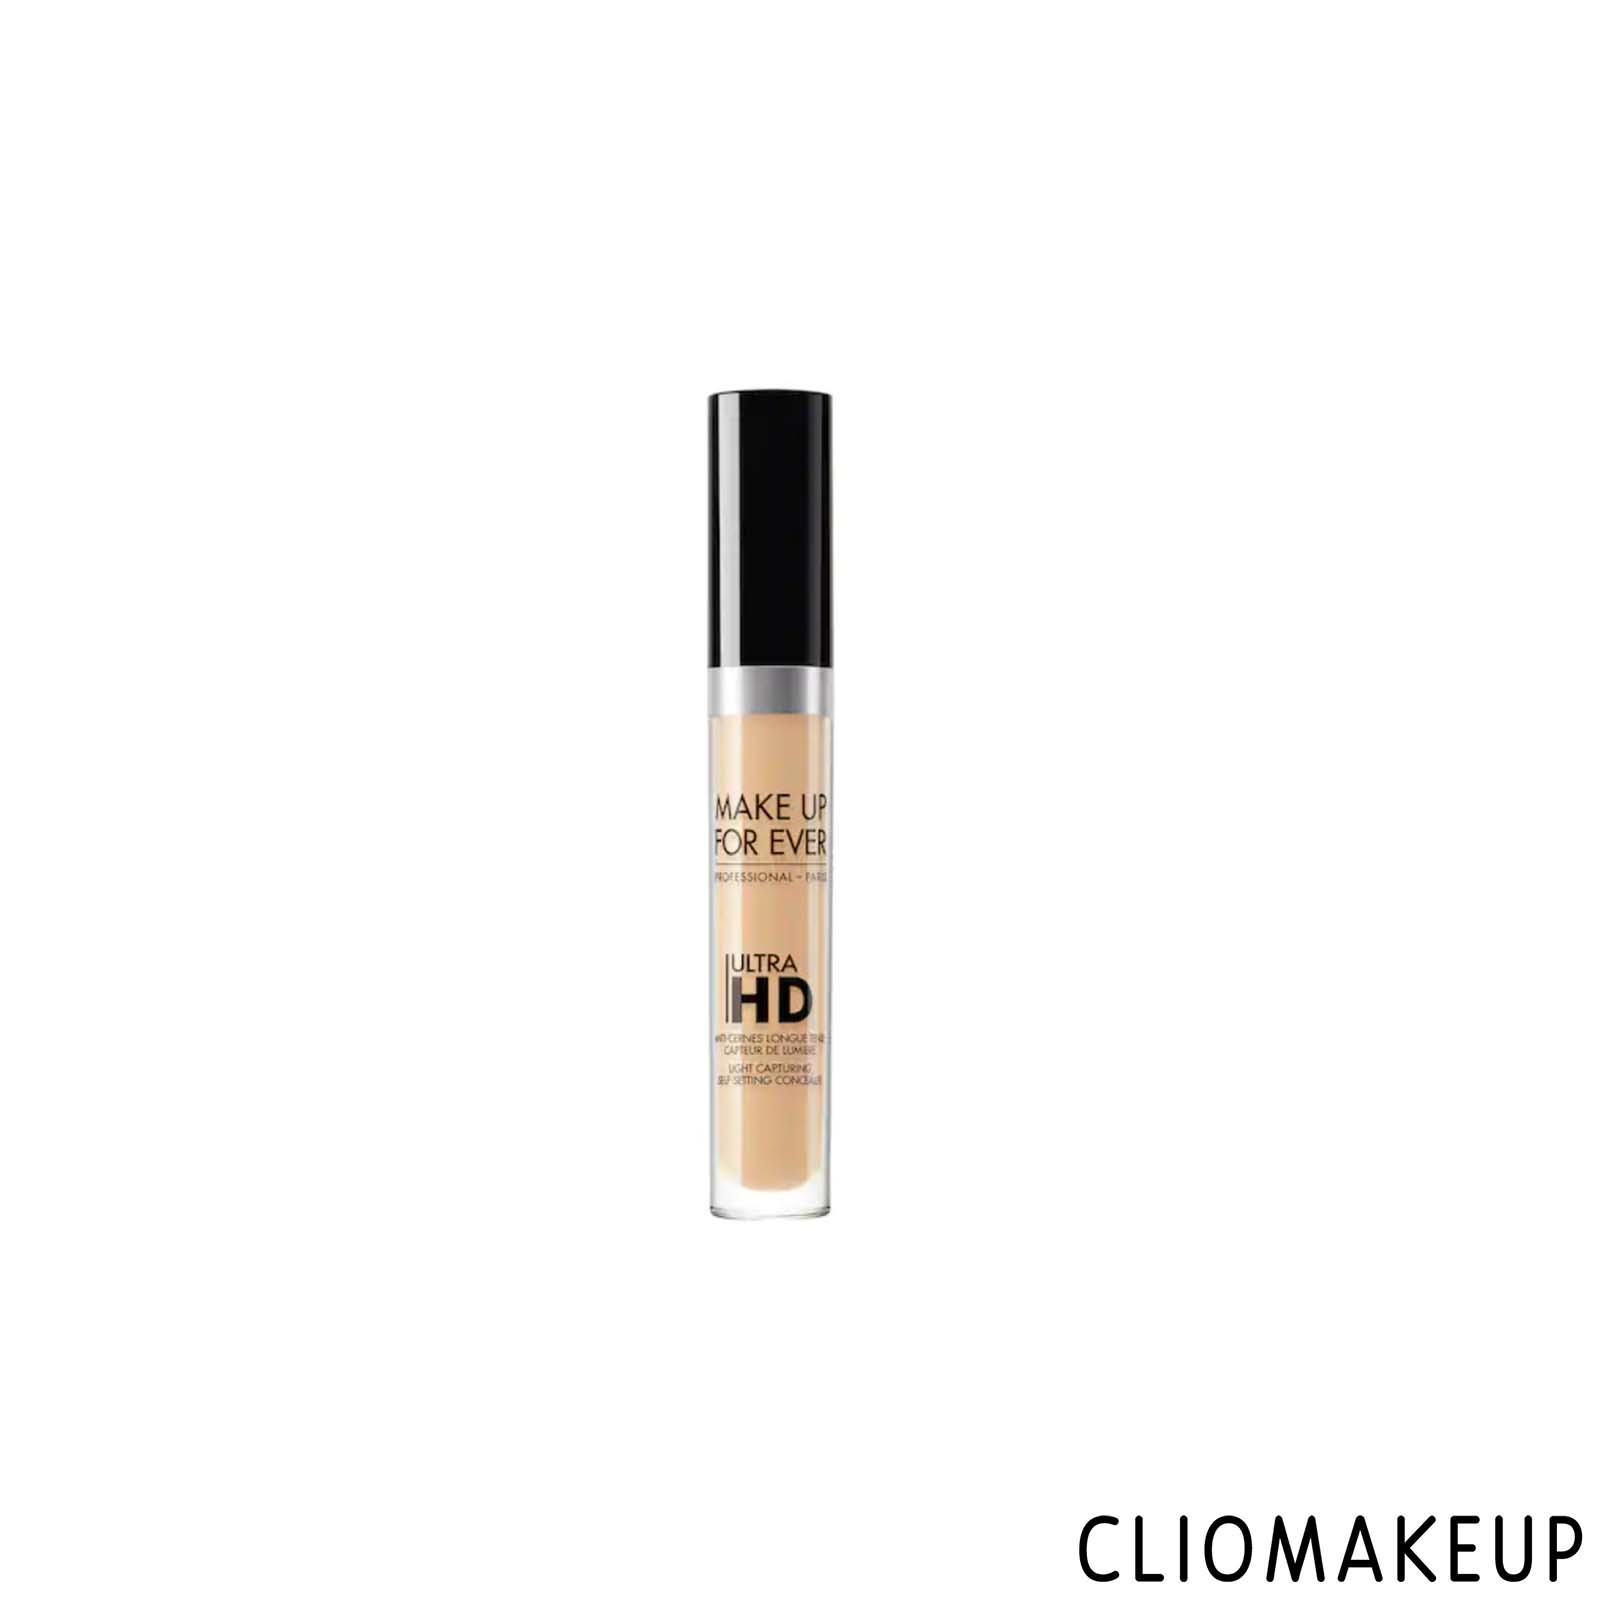 Recensione Correttore Make Up Forever Ultra Hd Light Capturing Self Setting  Concealer